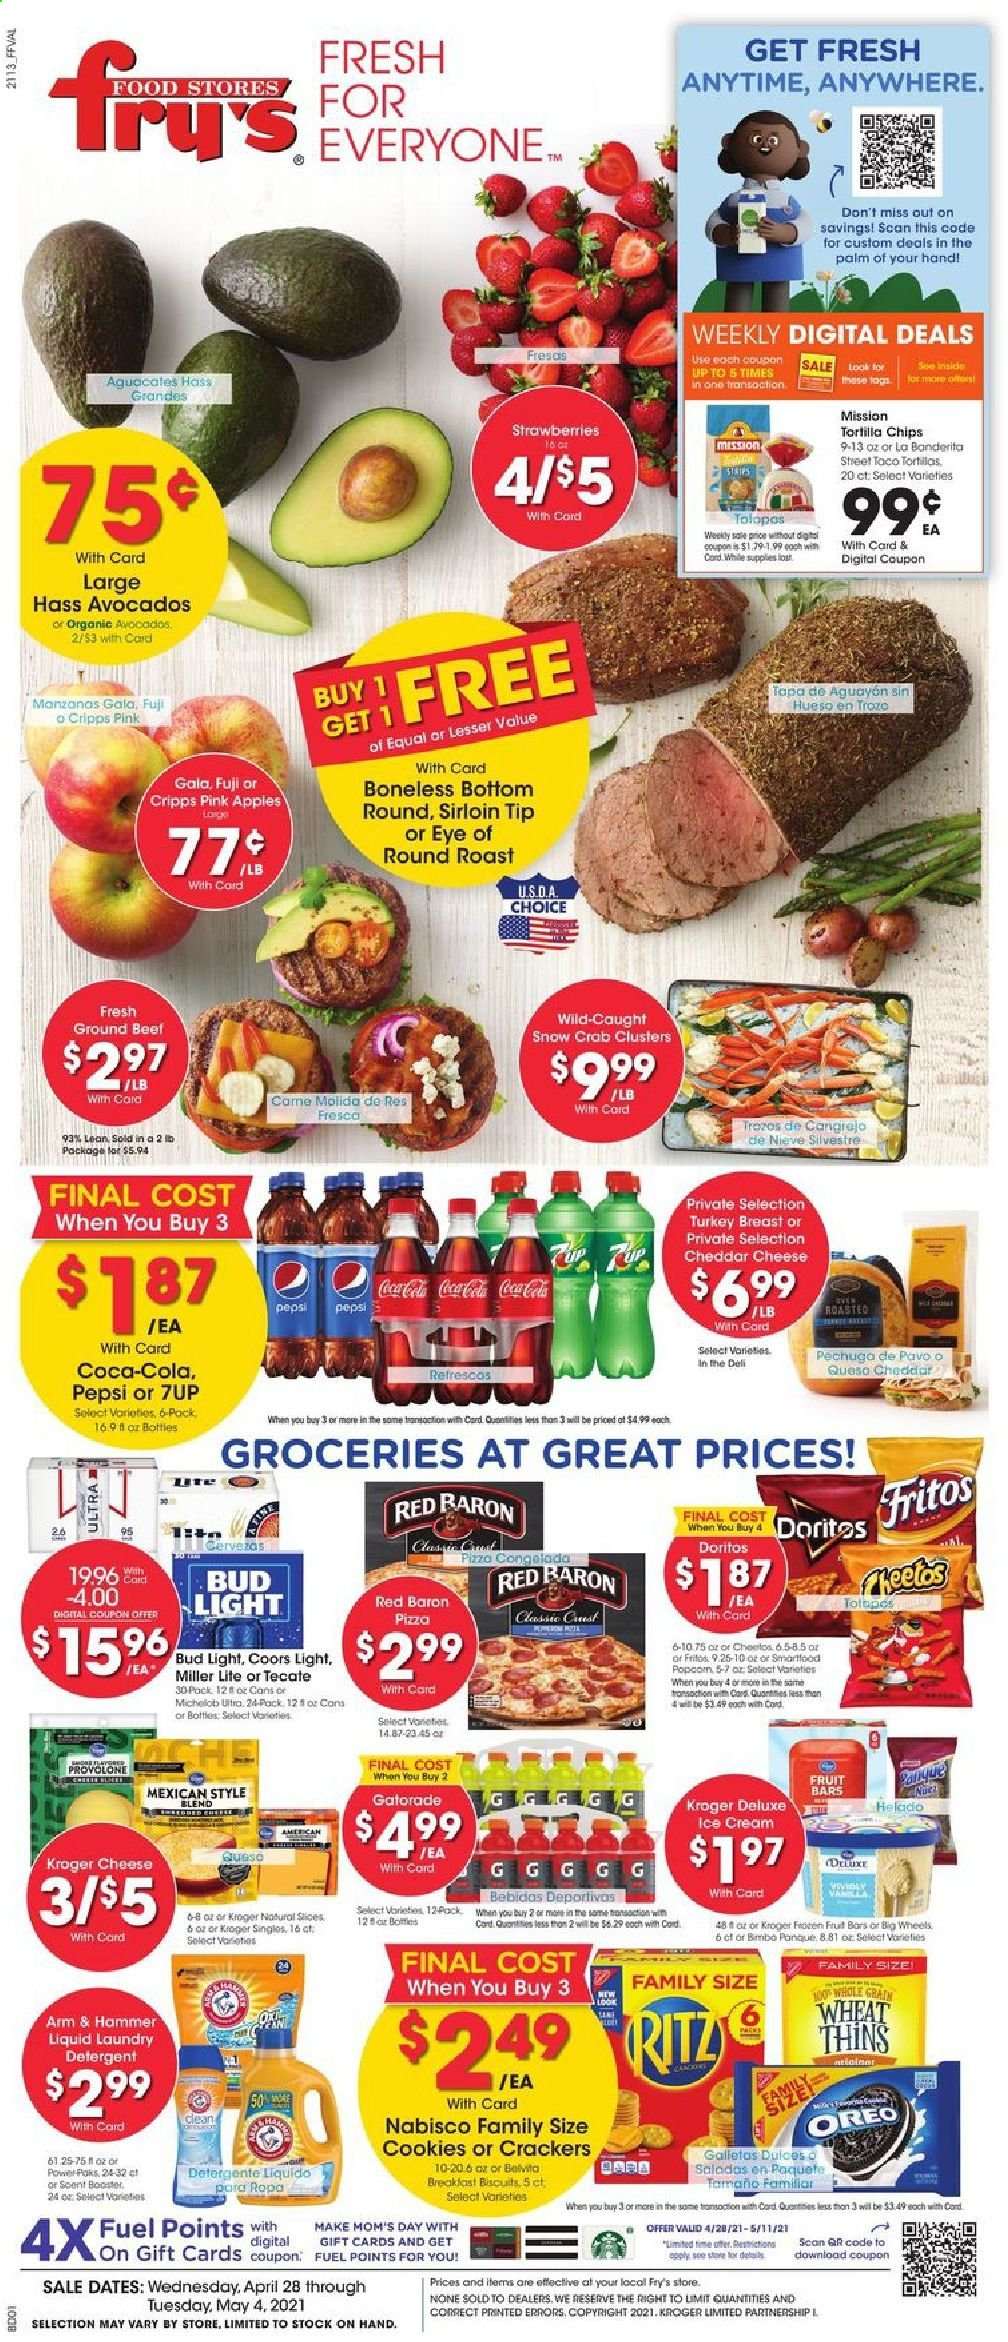 thumbnail - Fry’s Flyer - 04/28/2021 - 05/04/2021 - Sales products - tortillas, apples, avocado, Gala, strawberries, crab, pizza, Oreo, ice cream, strips, Red Baron, cookies, crackers, biscuit, RITZ, Doritos, Fritos, Cheetos, chips, Thins, ARM & HAMMER, belVita, Coca-Cola, Pepsi, 7UP, Gatorade, beer, Miller Lite, Coors, Michelob, Bud Light, beef meat, ground beef, eye of round, round roast, detergent, laundry detergent, Crest. Page 1.